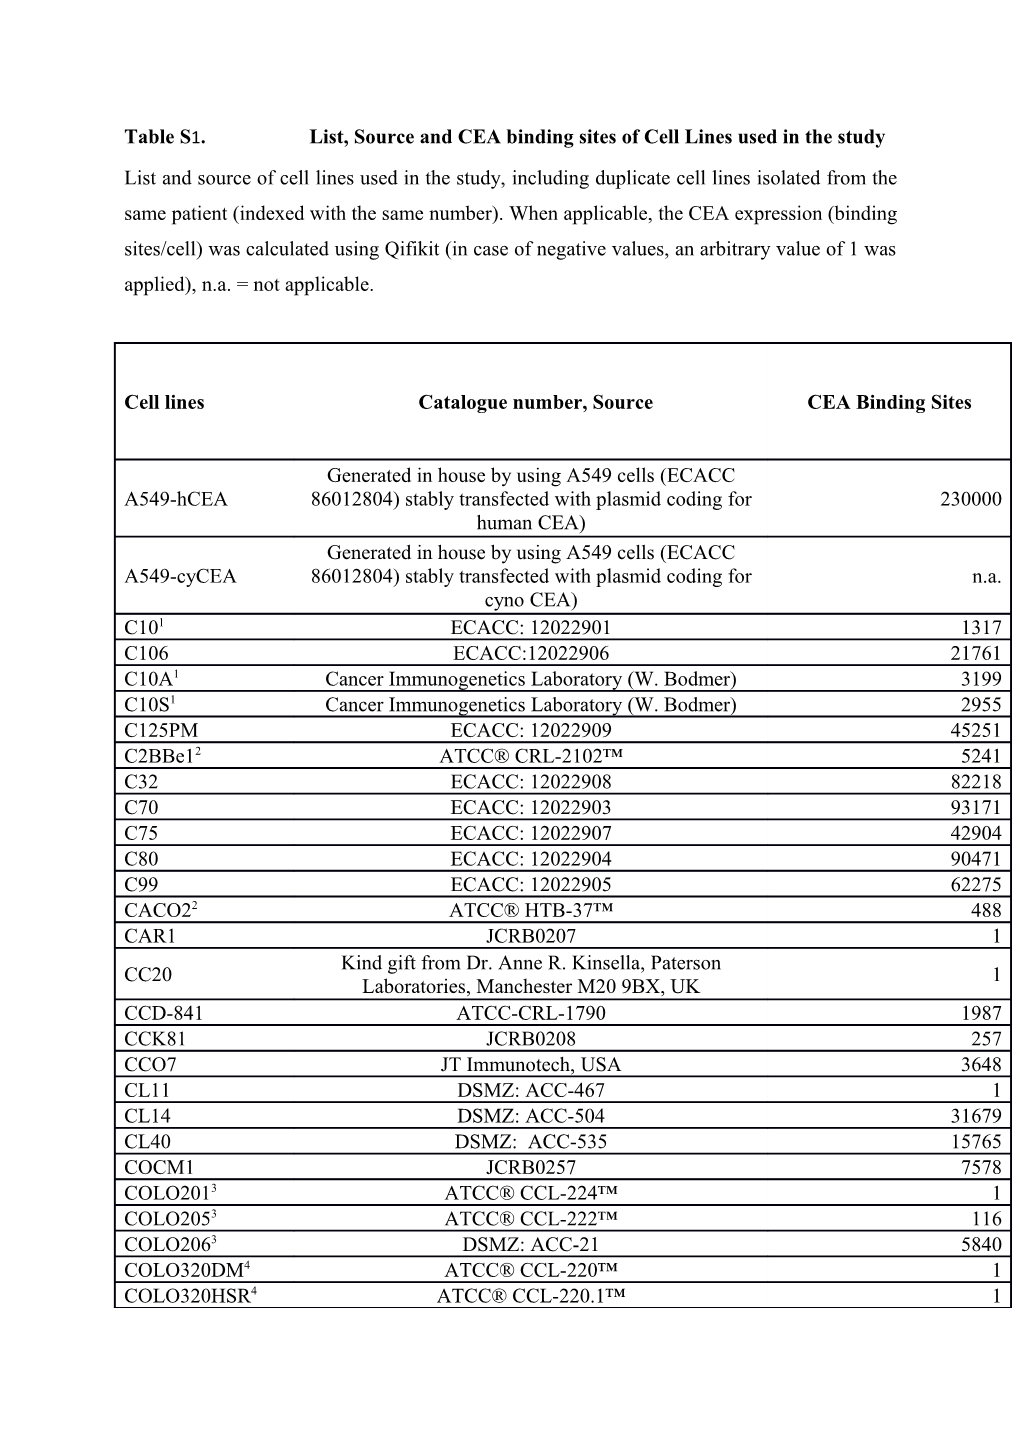 Table S1.List, Source and CEA Binding Sites of Cell Lines Used in the Study